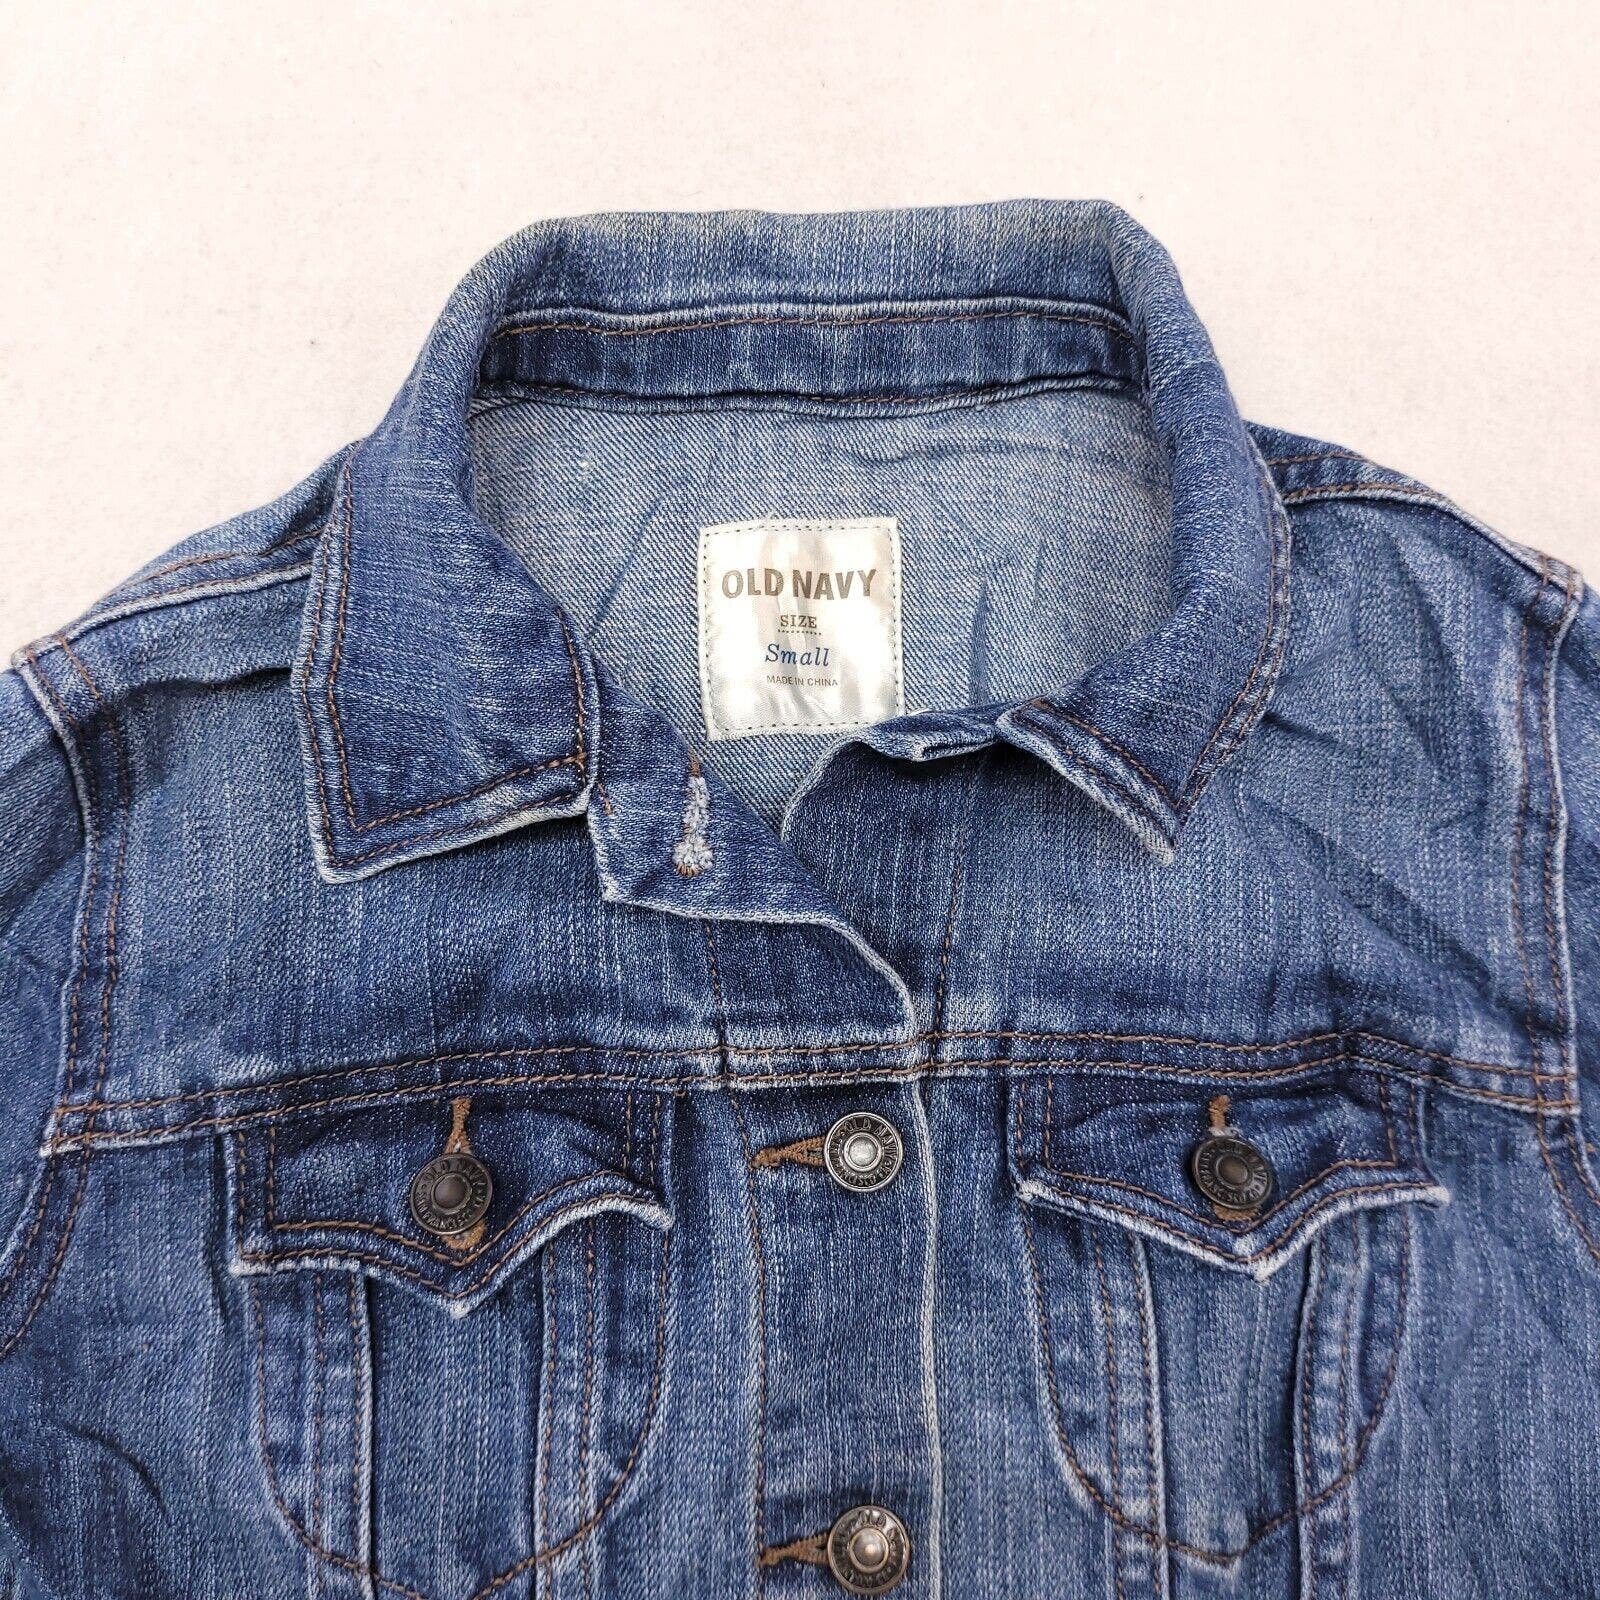 High quality Old Navy Casual Button Up Long Sleeve Denim Jean Jacket Womens Size S Blue oX0KHKLZf US Sale